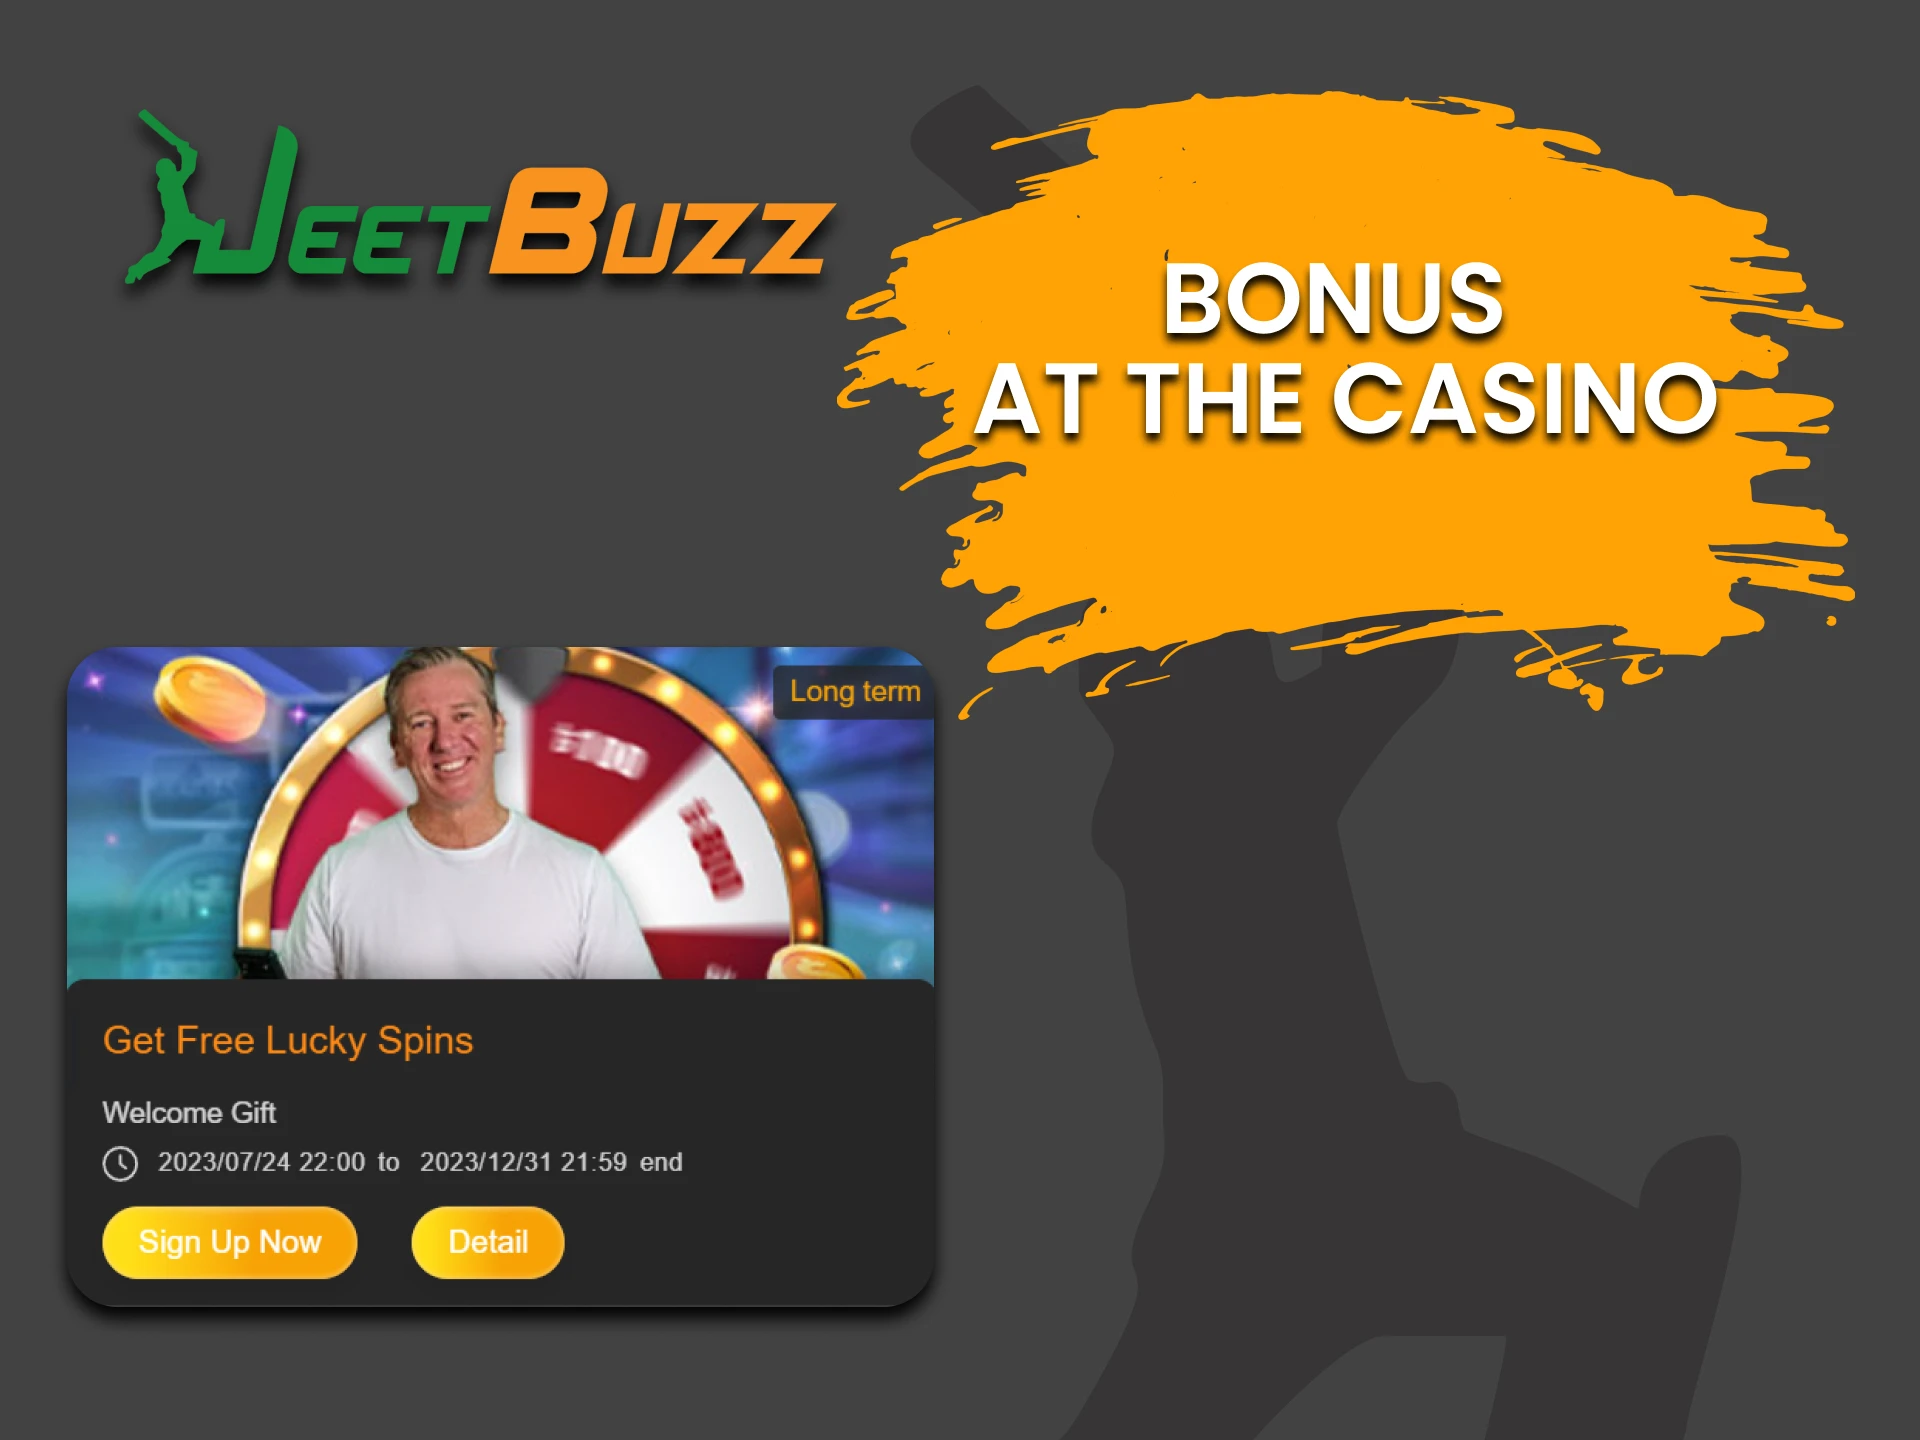 Claim your casino bonus when you sign up with JeetBuzz.